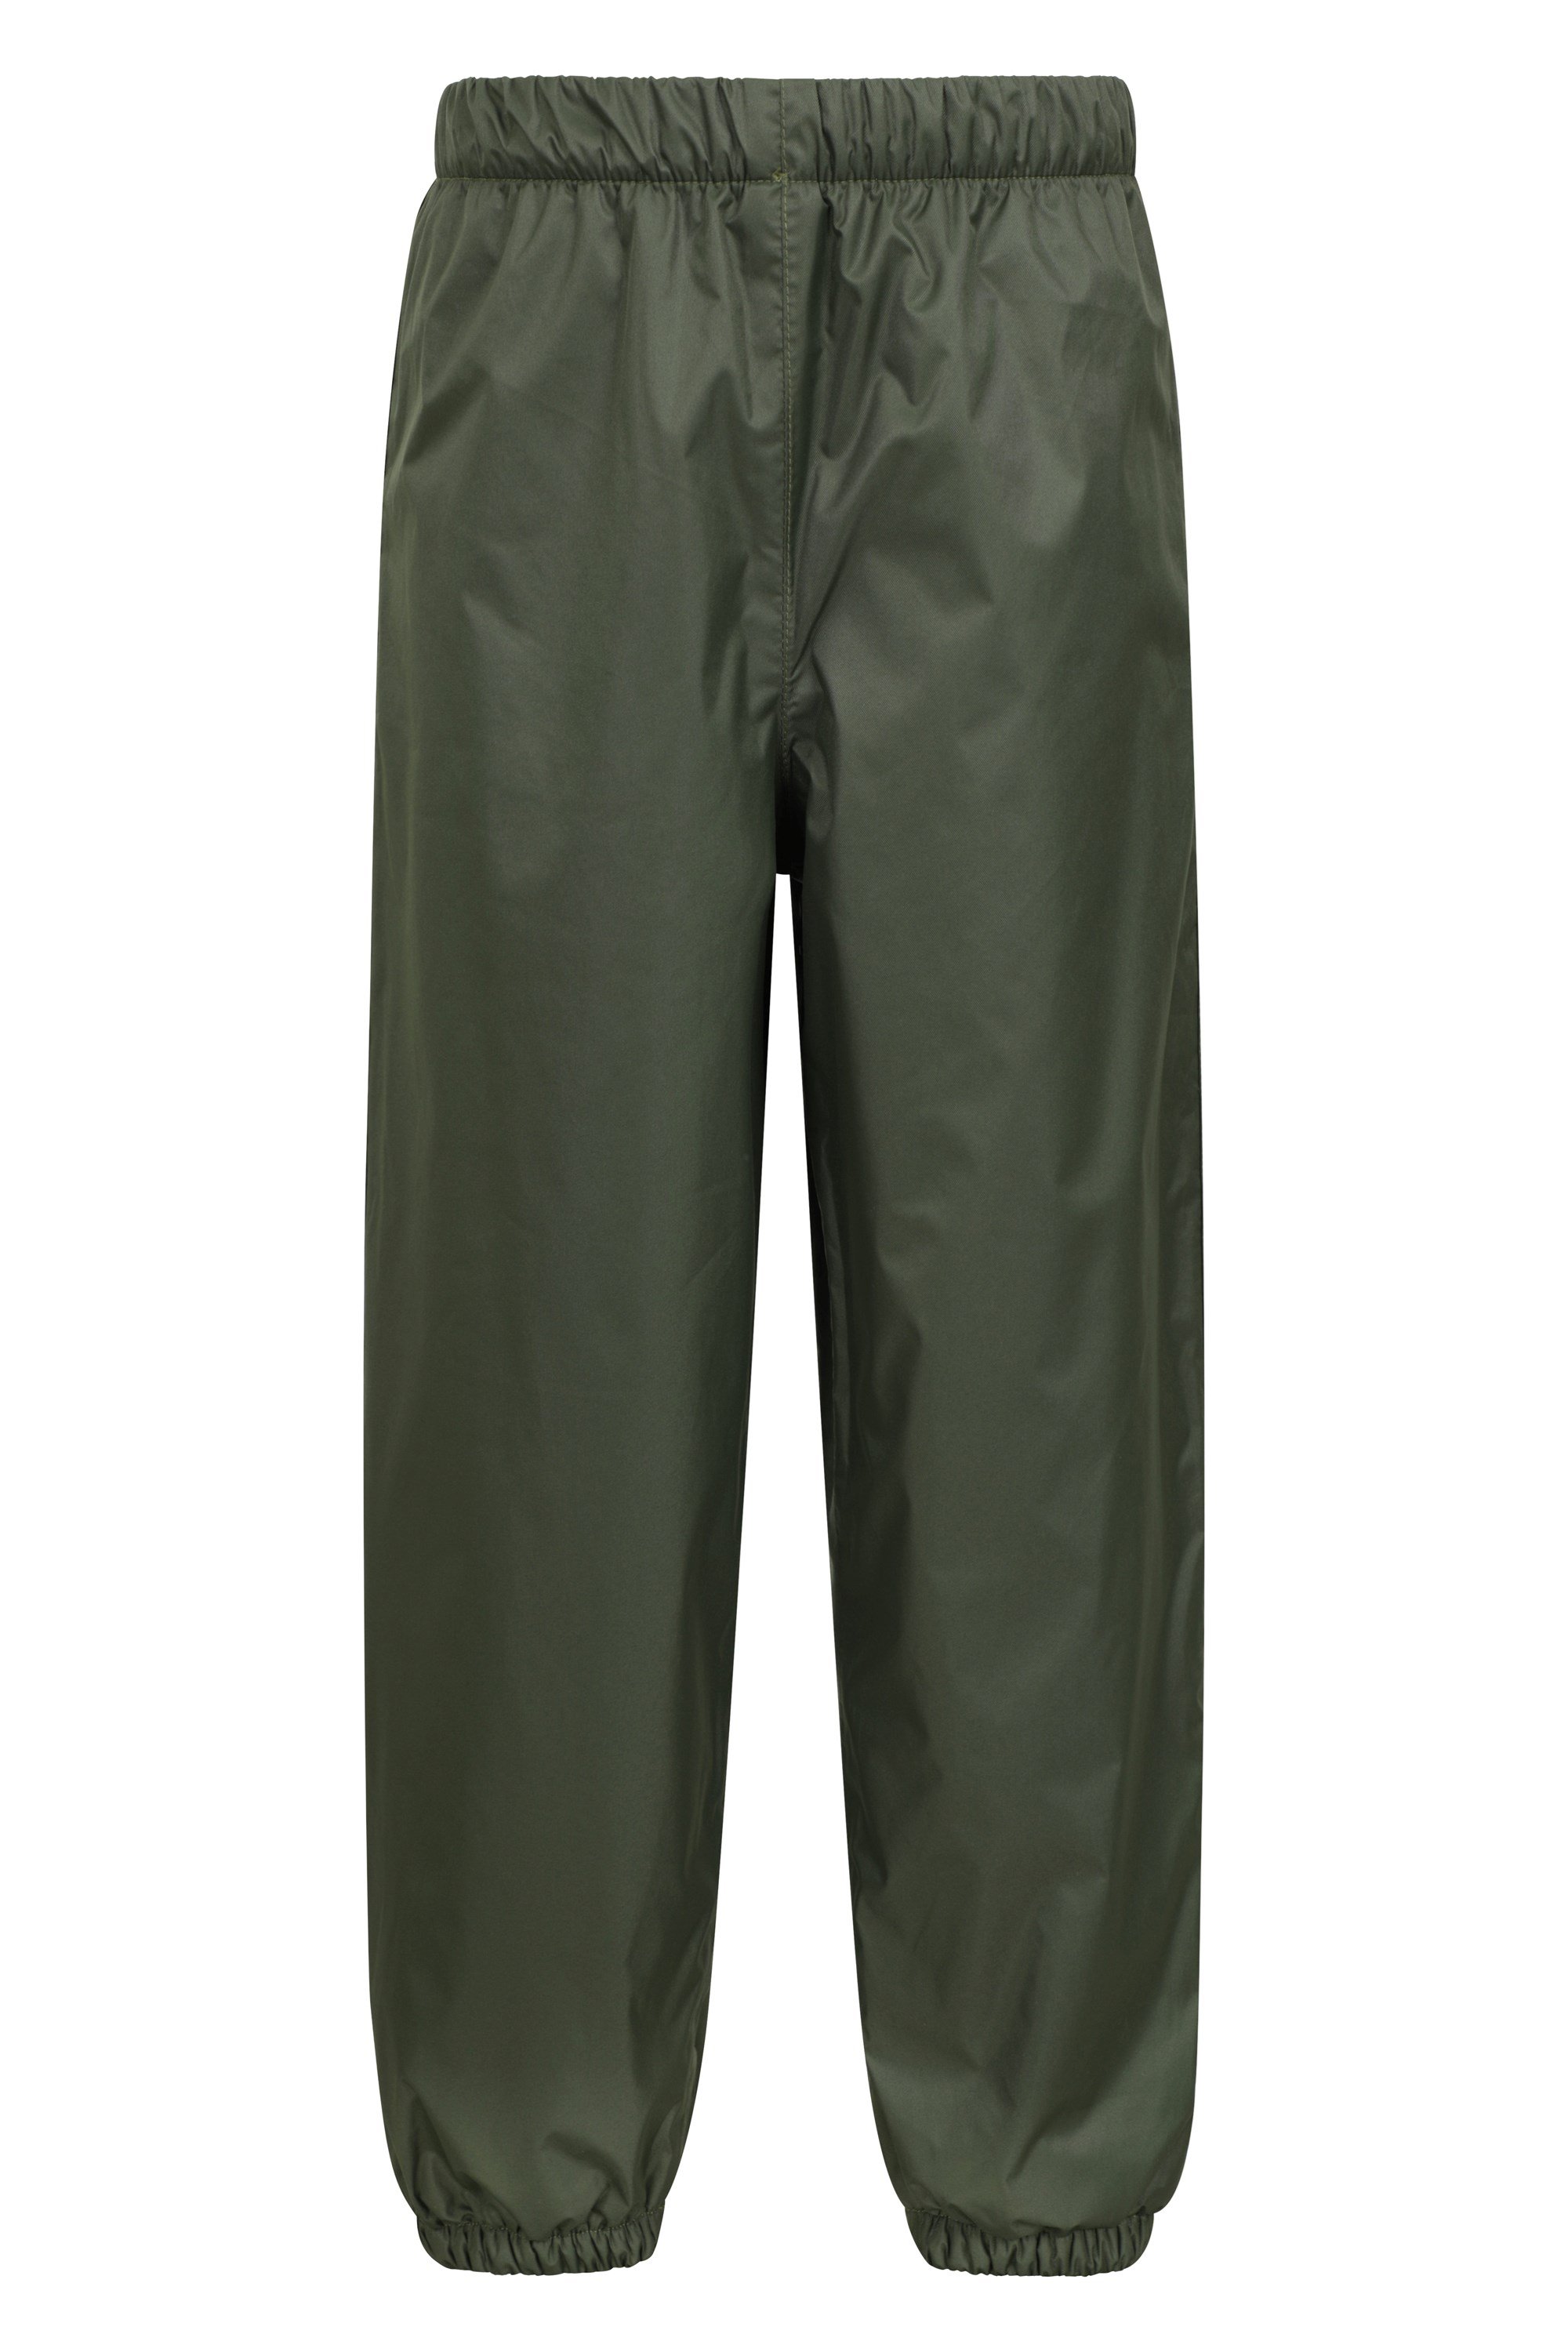 Buy UJEAVETTE® Trousers Water Resistant Lined Fleece Cycling Pants for Men  Army Green XL at Amazon.in